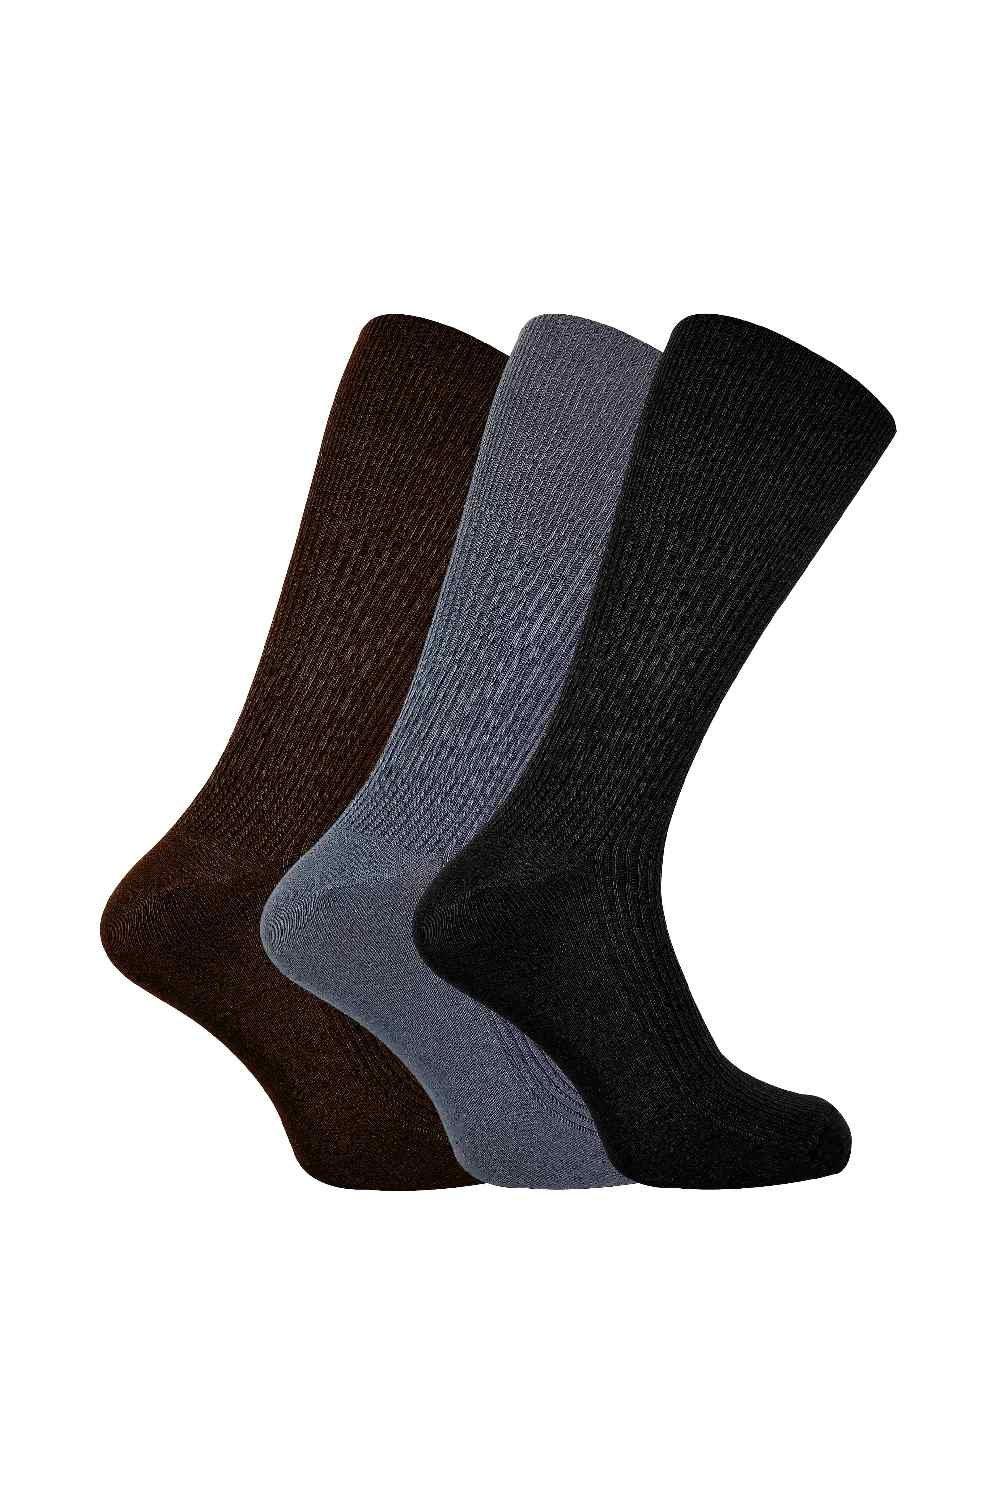 3 Pairs Ribbed Non Elastic Loose Top Cashmere Blend Dress Socks